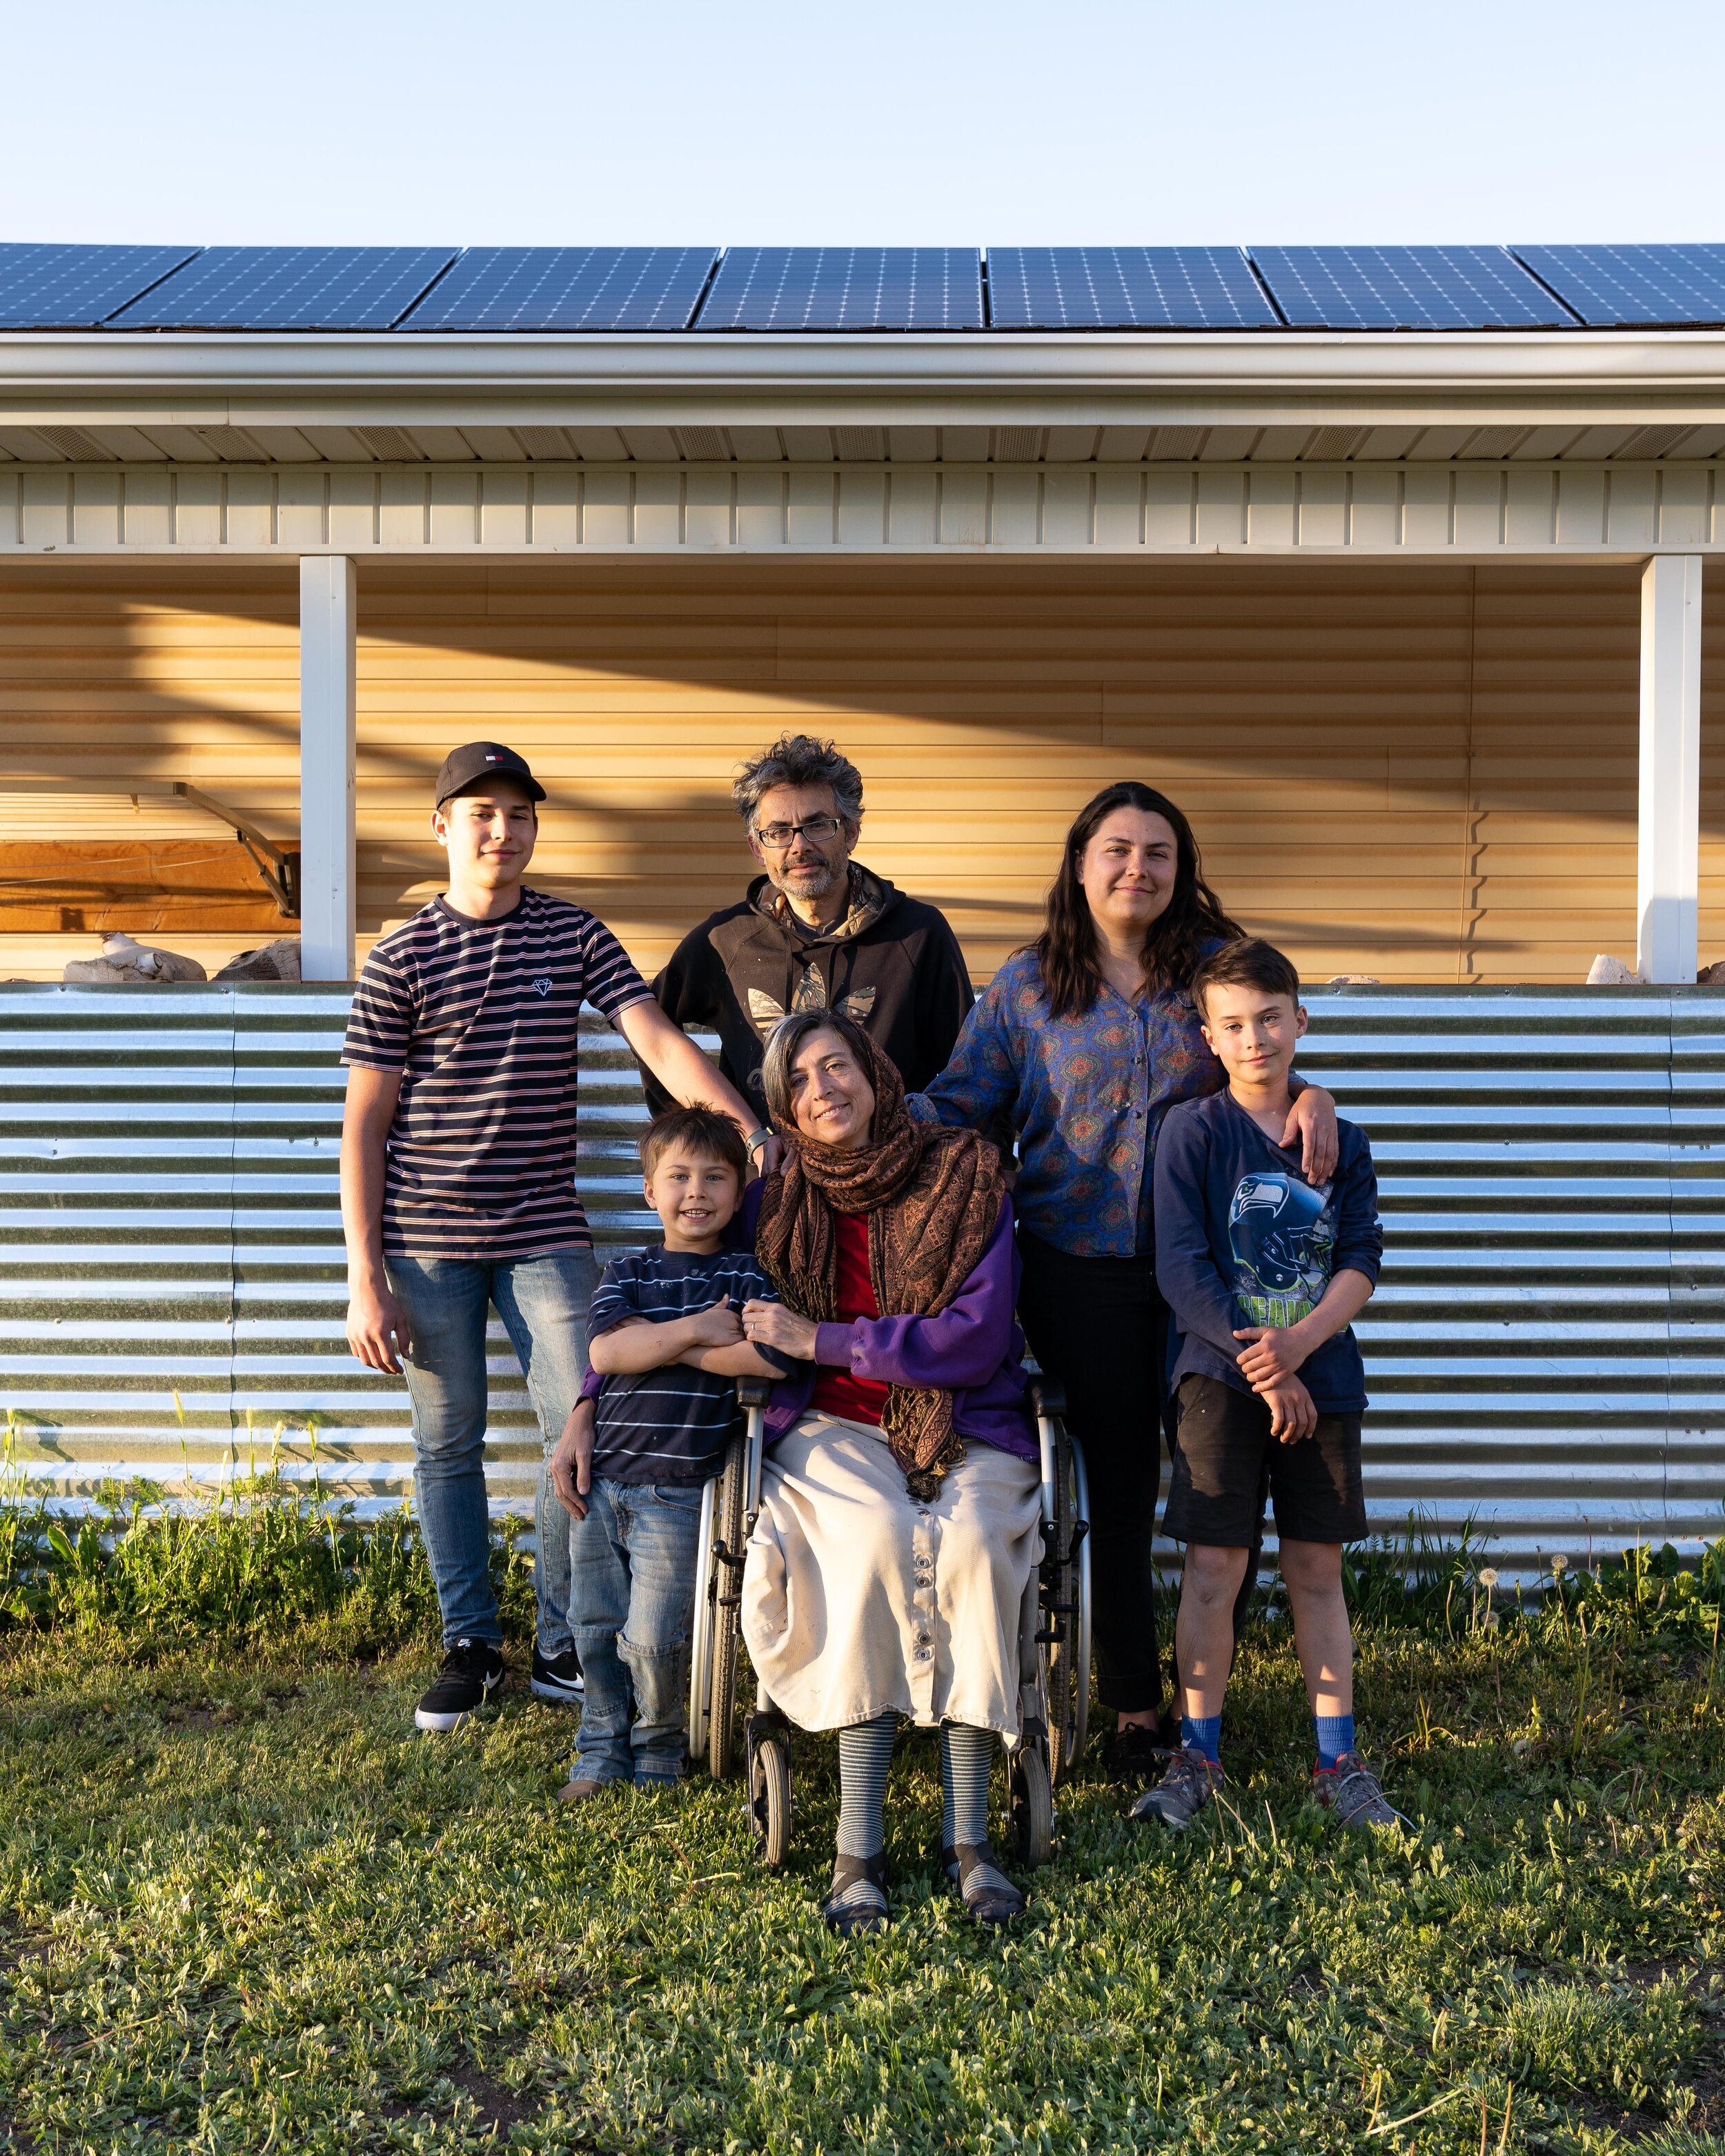  “We’d love to have you for dinner if you can stay for a bit. We’ll set everything up in the backyard.” - Allegra (Franco, JT, Aubrey, Leslie-María, Allegra, Dante) | 04/24/20 (New Harmony, UT) 